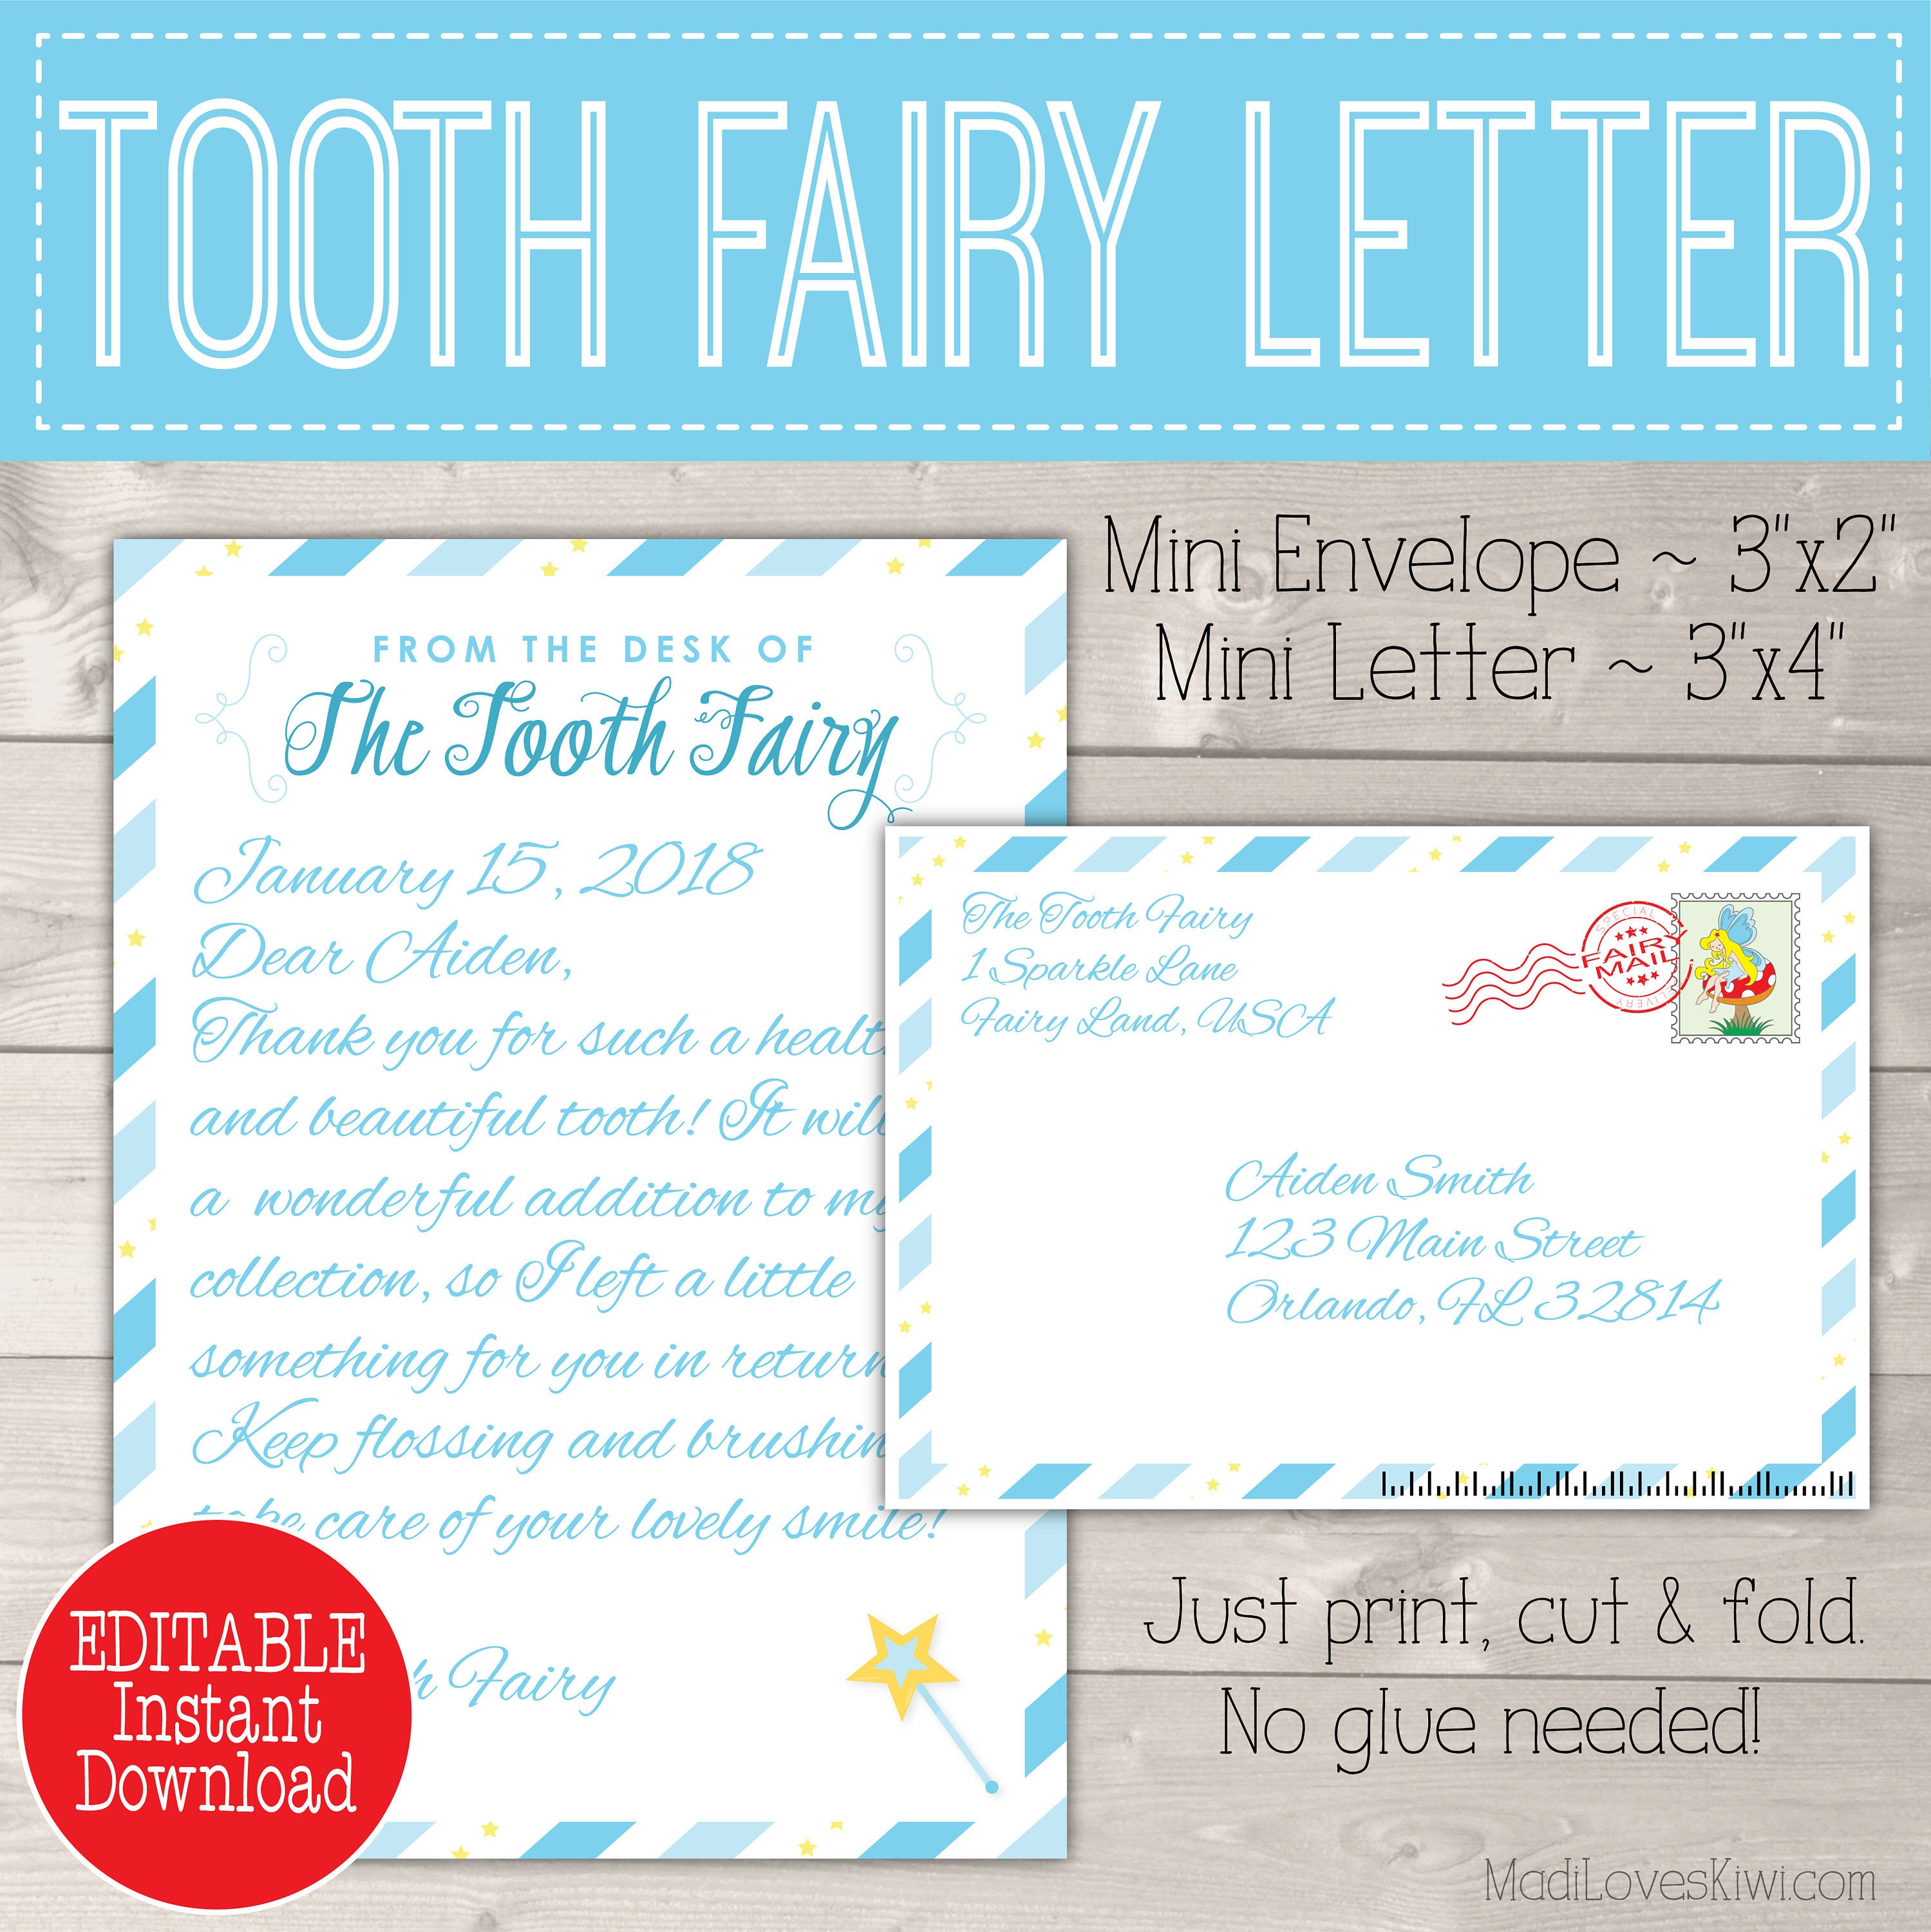 Personalized Tooth Fairy Letter Kit Boy Printable Download | Etsy - Tooth Fairy Stationery Free Printable